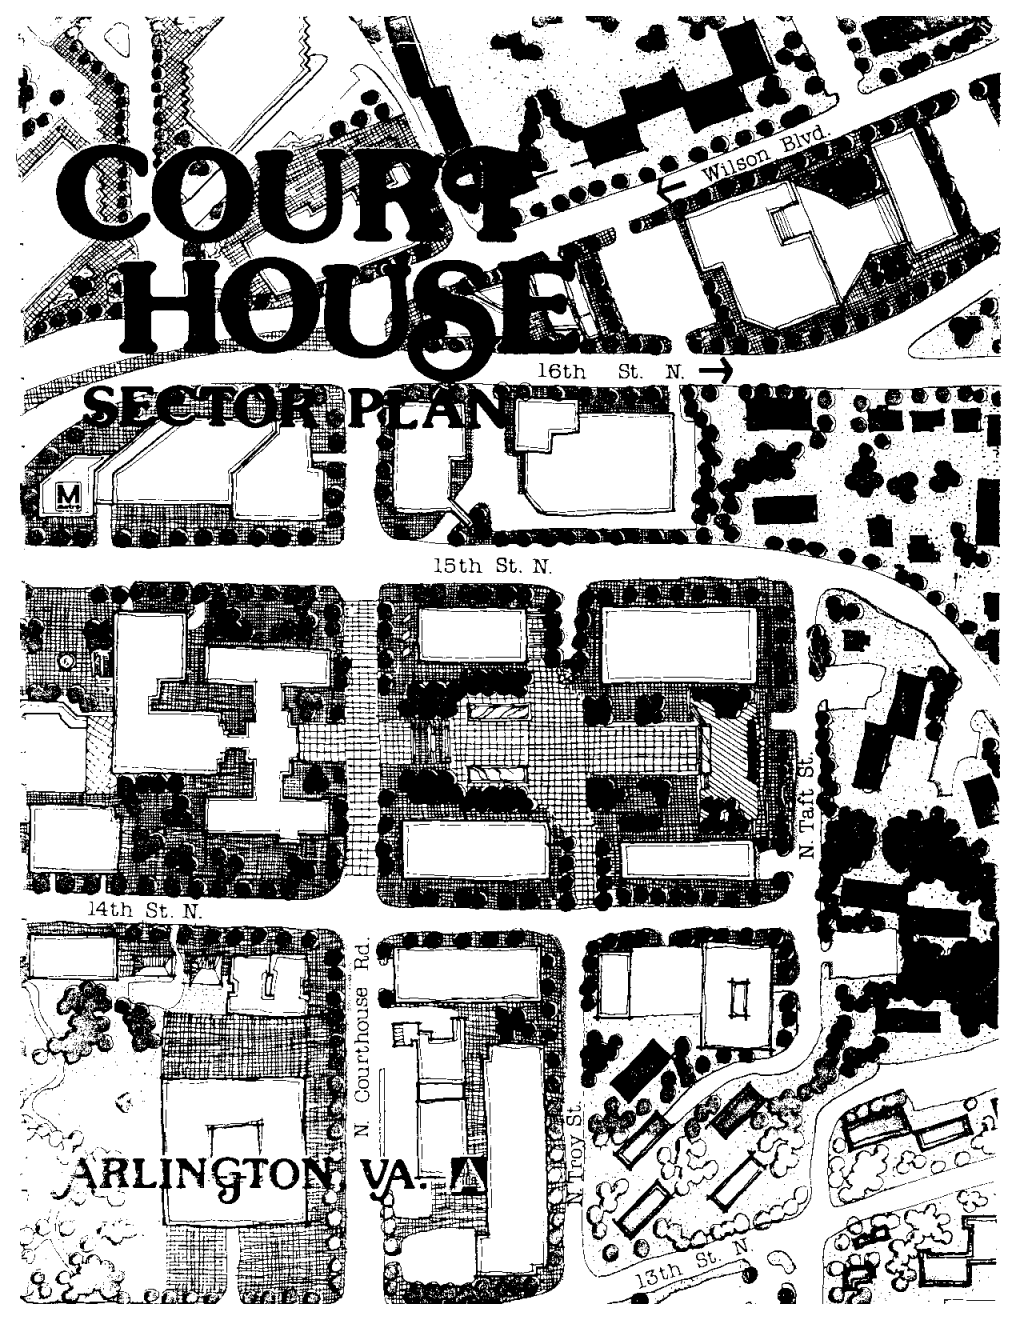 Courthouse Sector Plan